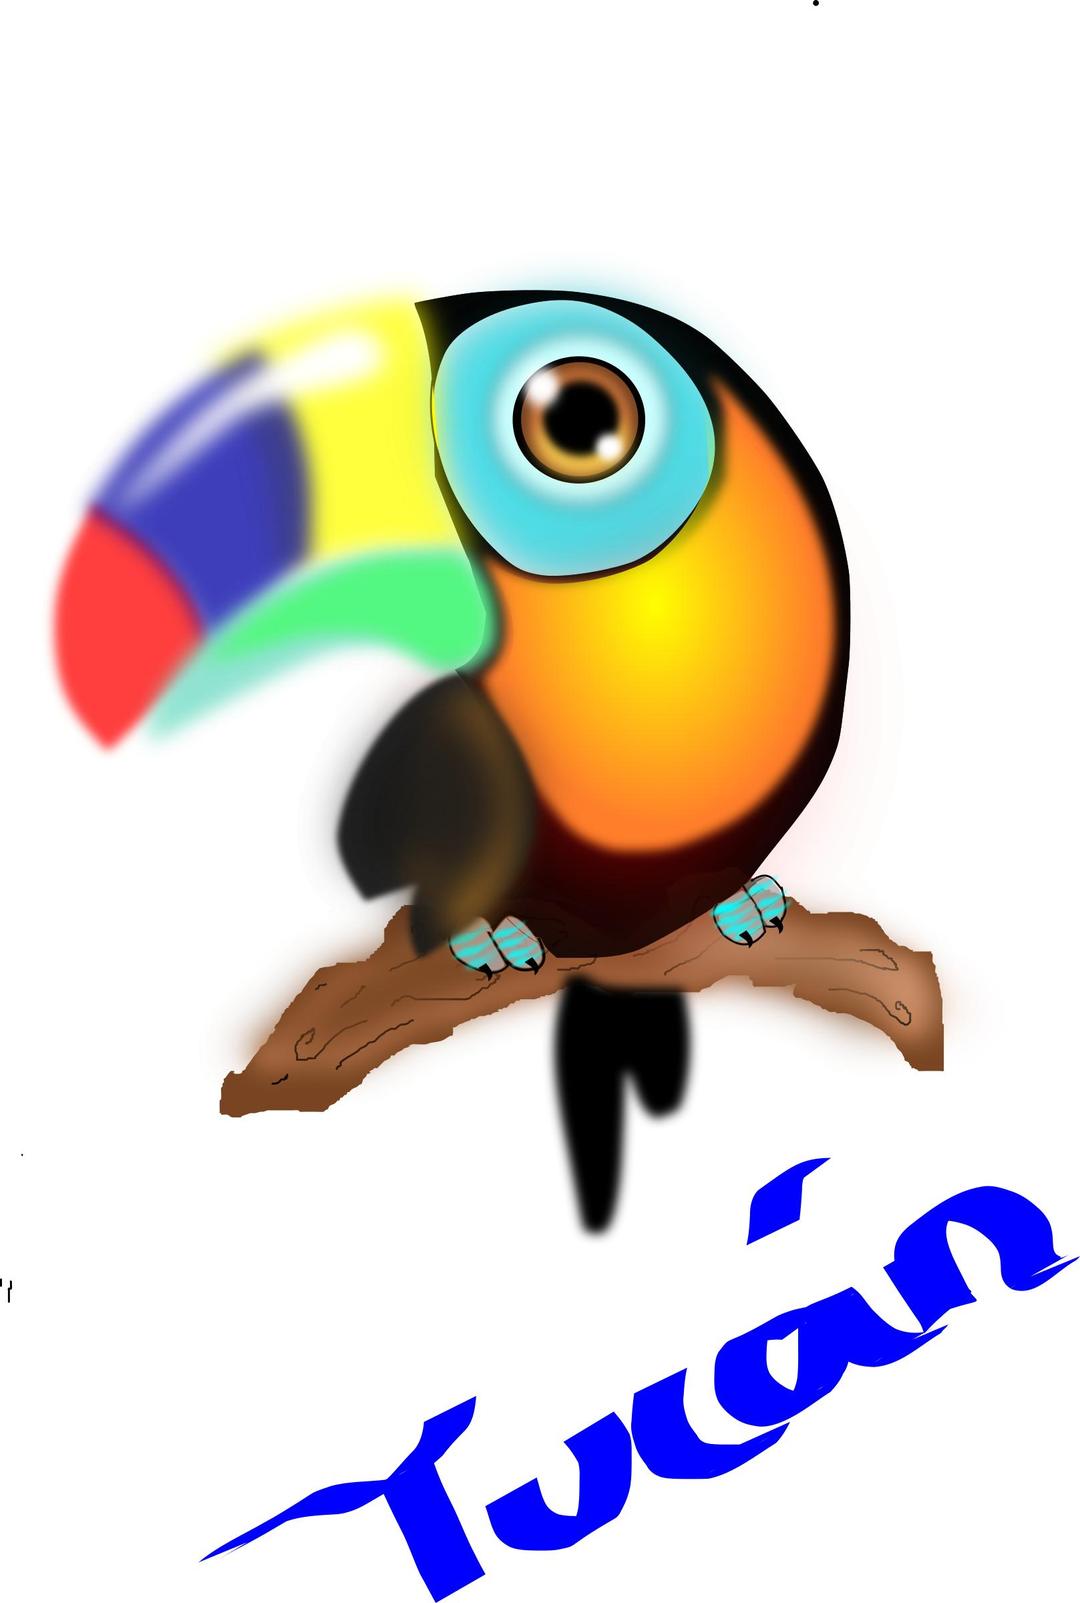 tucan colombiano png transparent